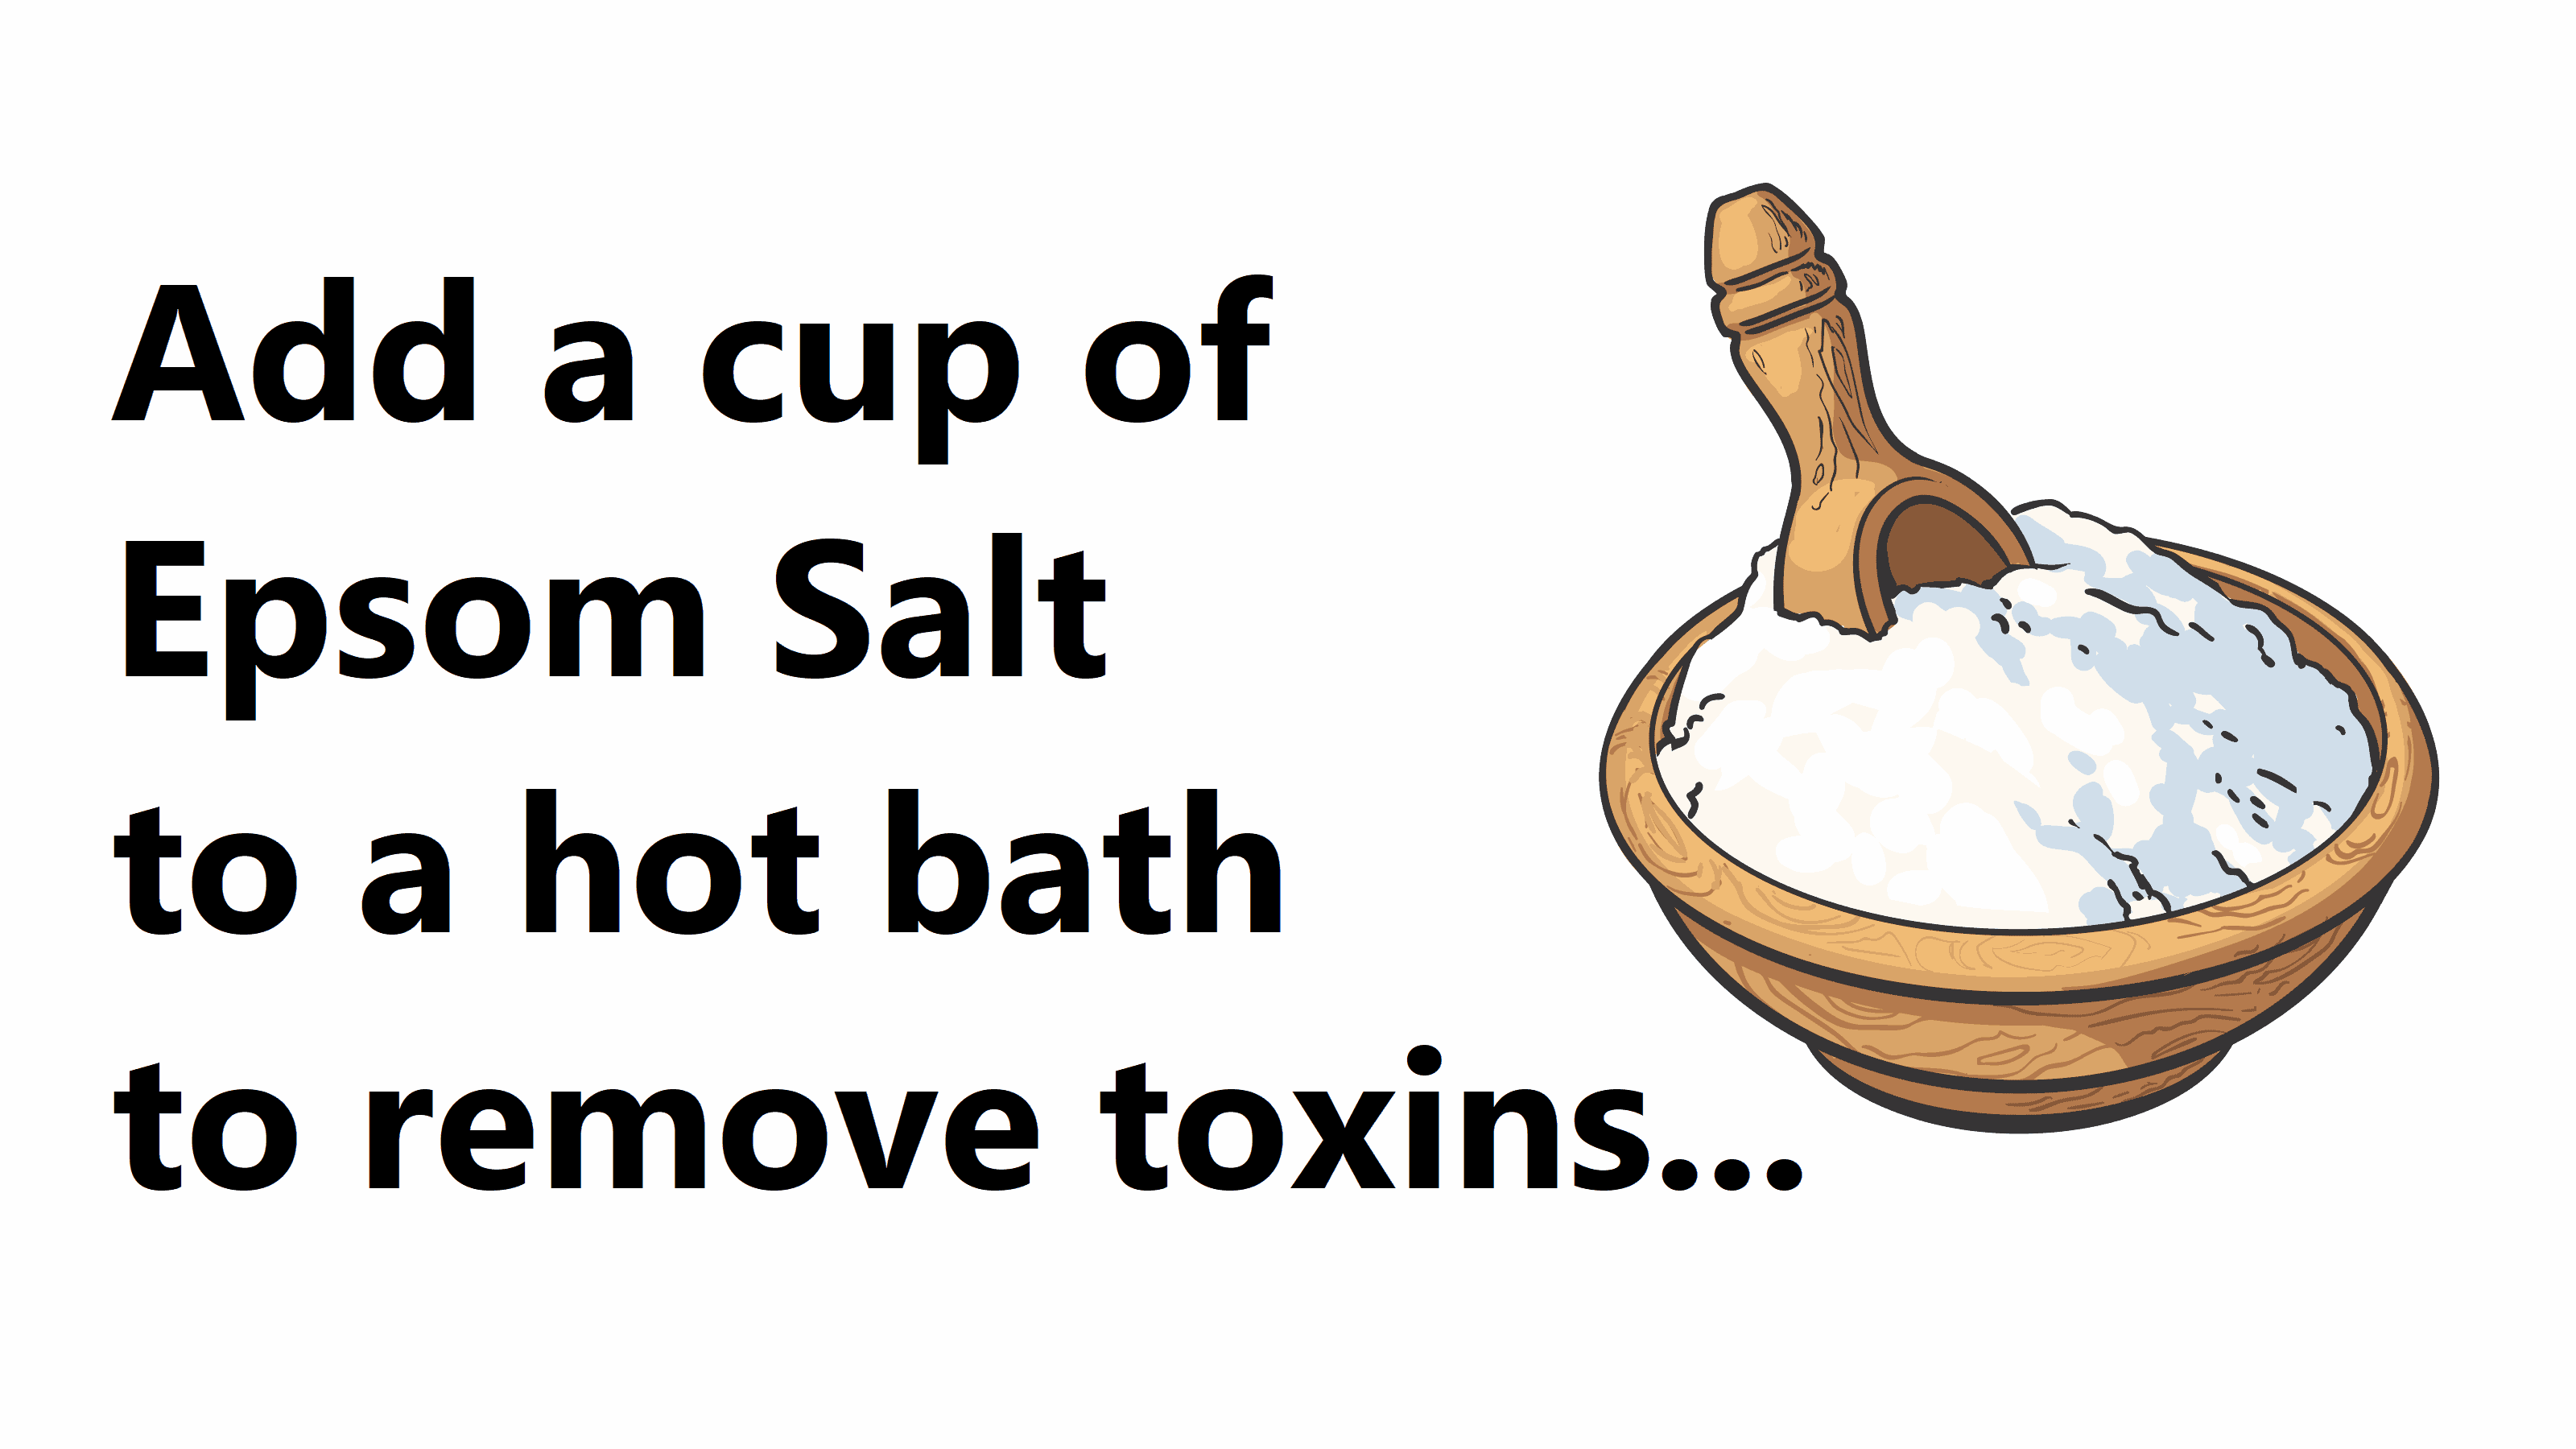 Researchers Reveal What Happens To Your Body When You Use Epsom Salt Every Day